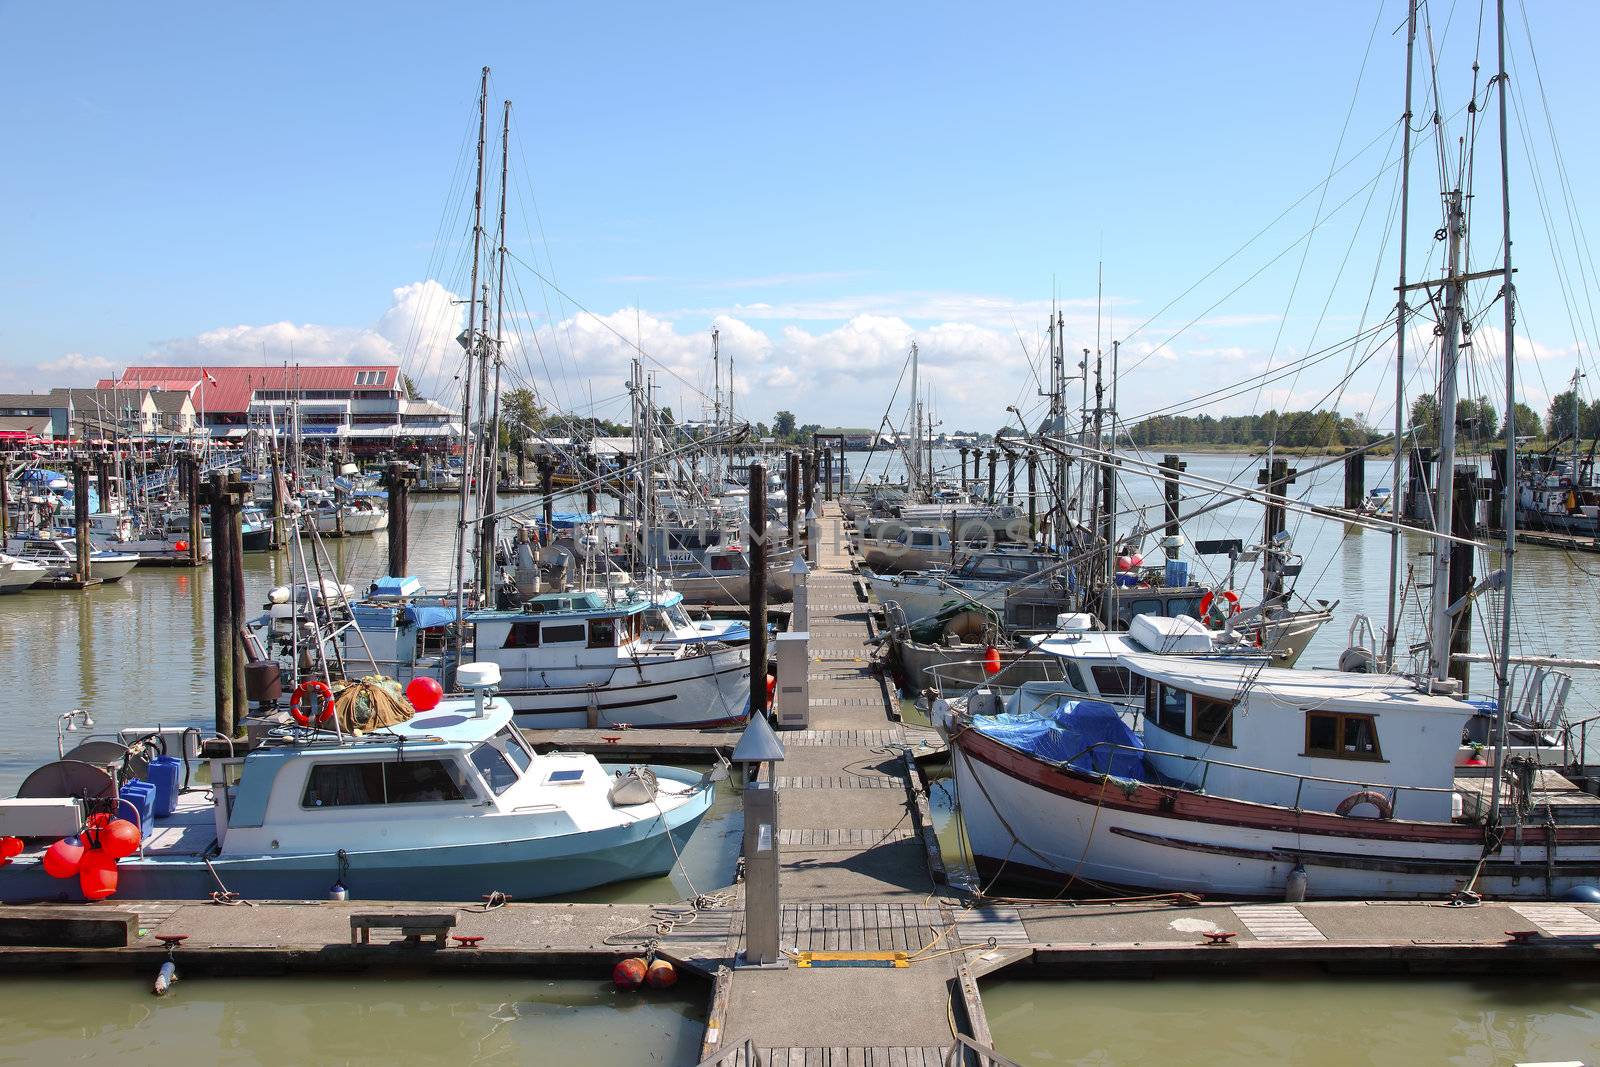 A large number of fishing boats moored in the marina in Richmond BC Canada.